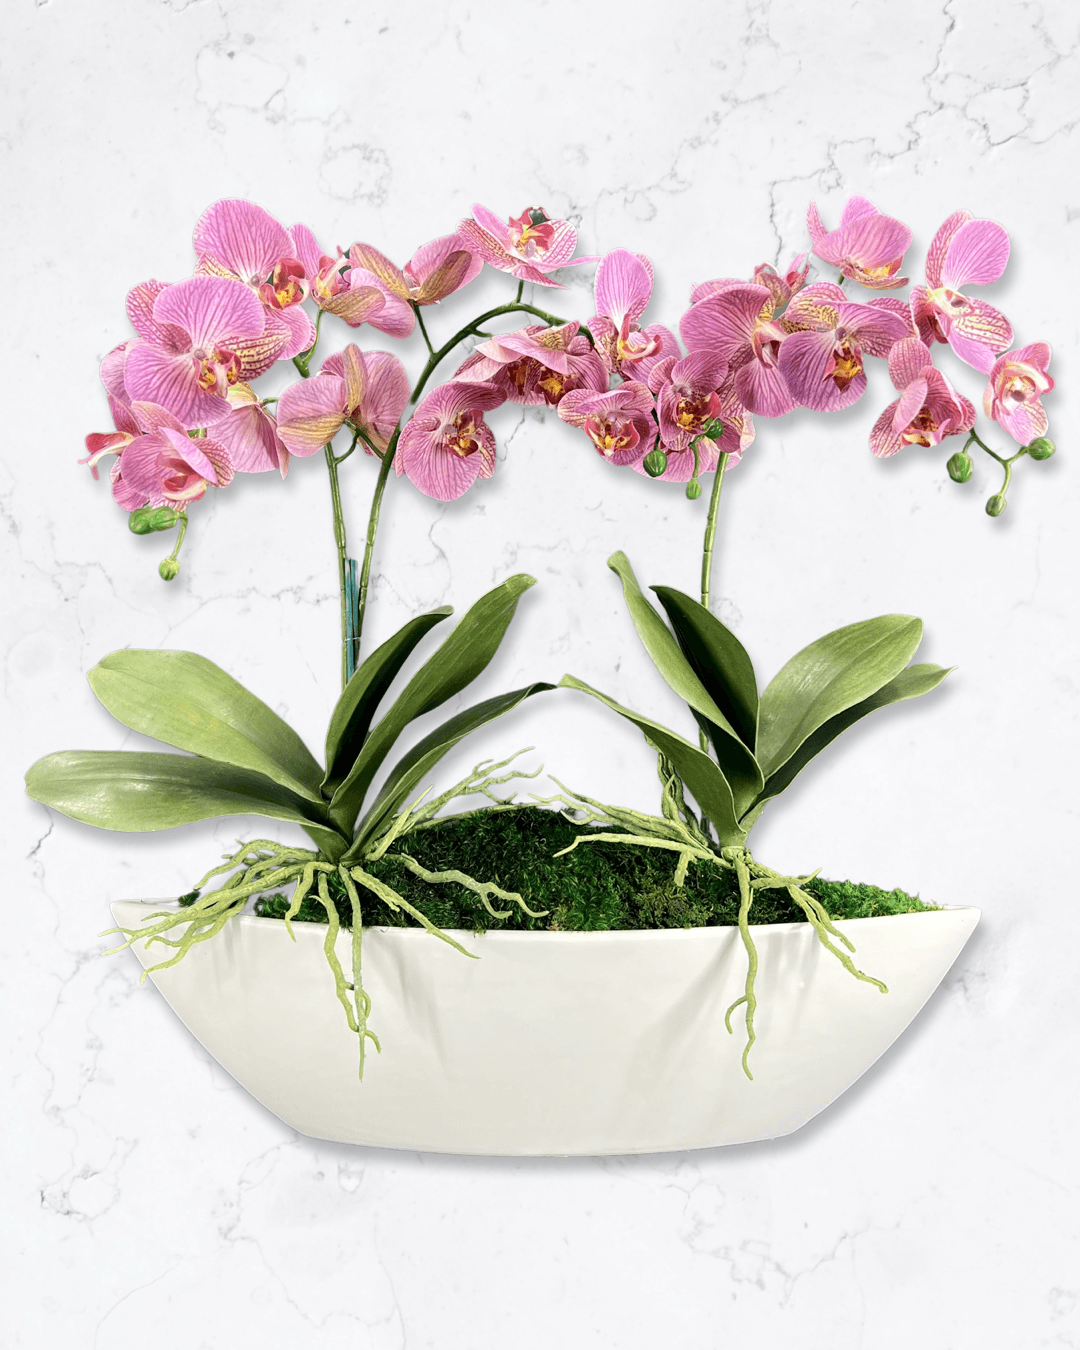 Orchid Centerpiece in Boat Bowl - MossFusion